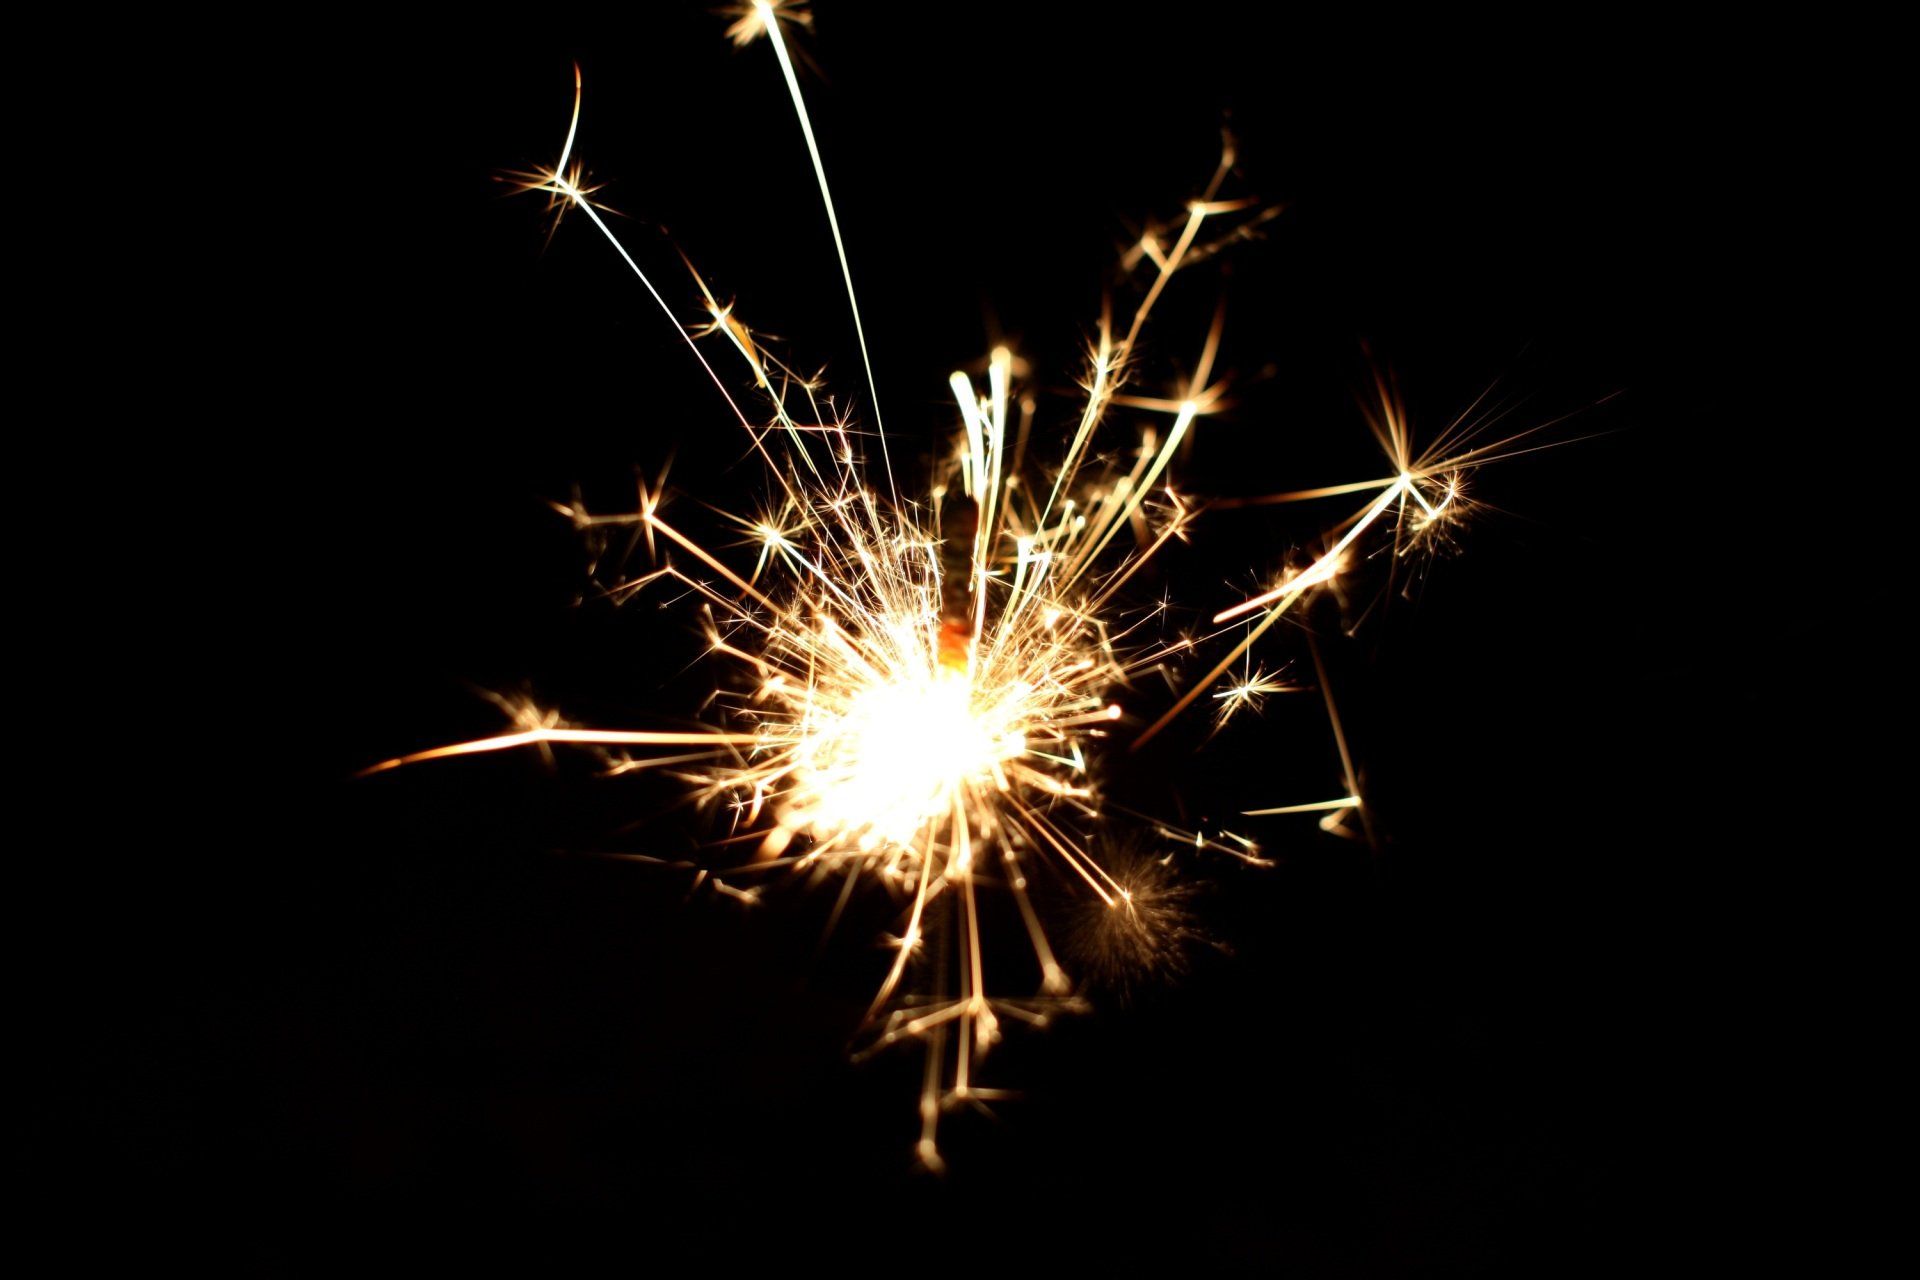 Yellow fireworks on a black background night sky